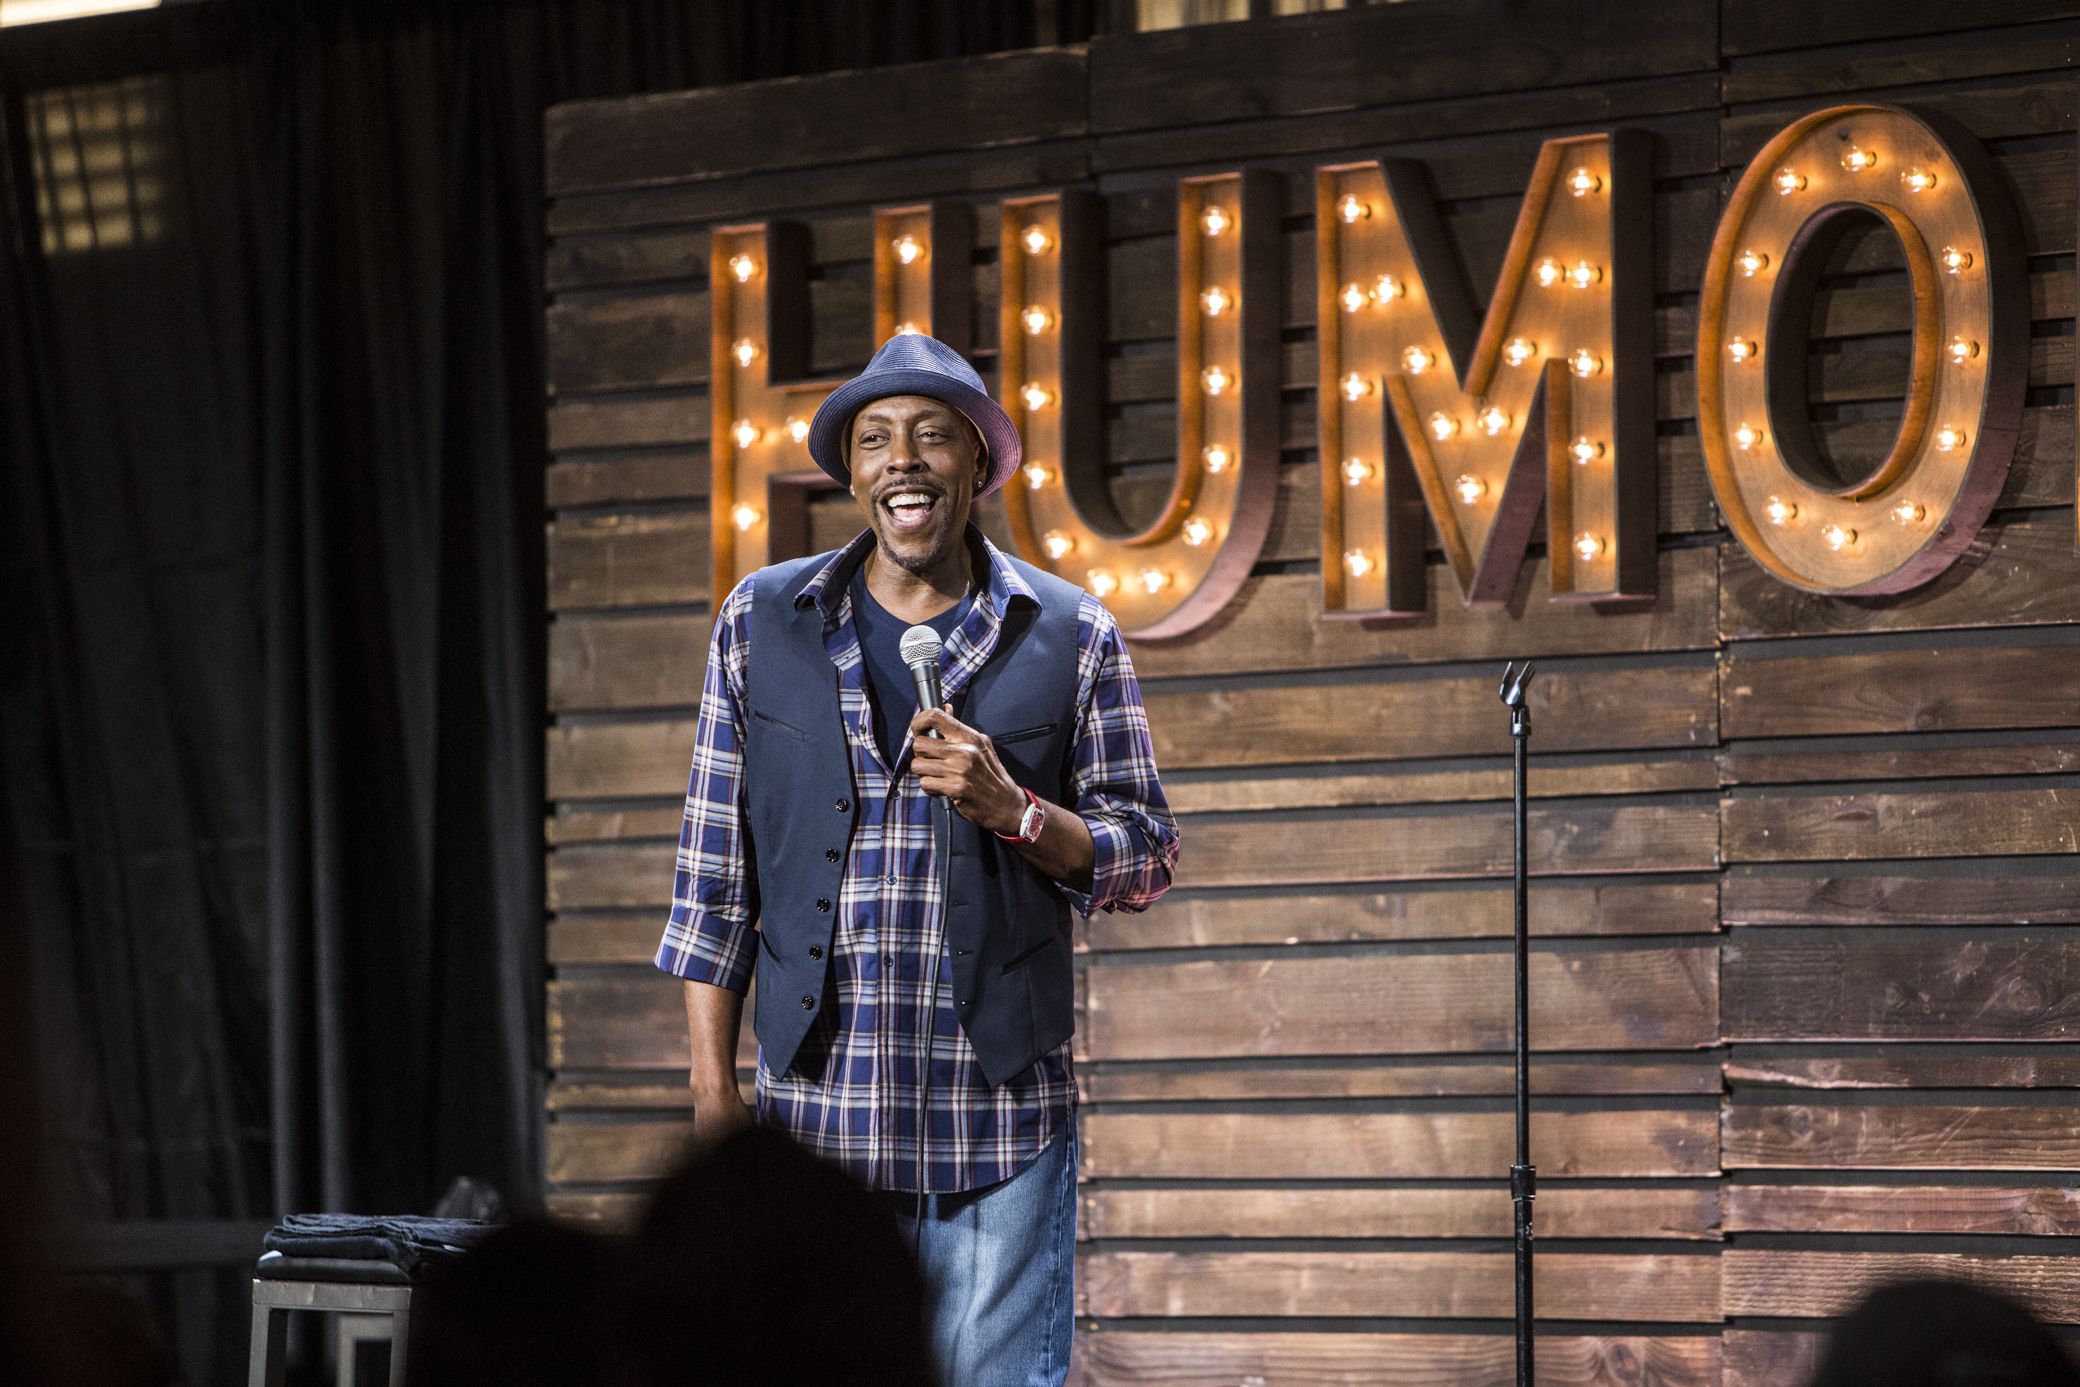 arsenio hall 2 KAABOO Del Mar Succeeds at Being a Festival for Everyone